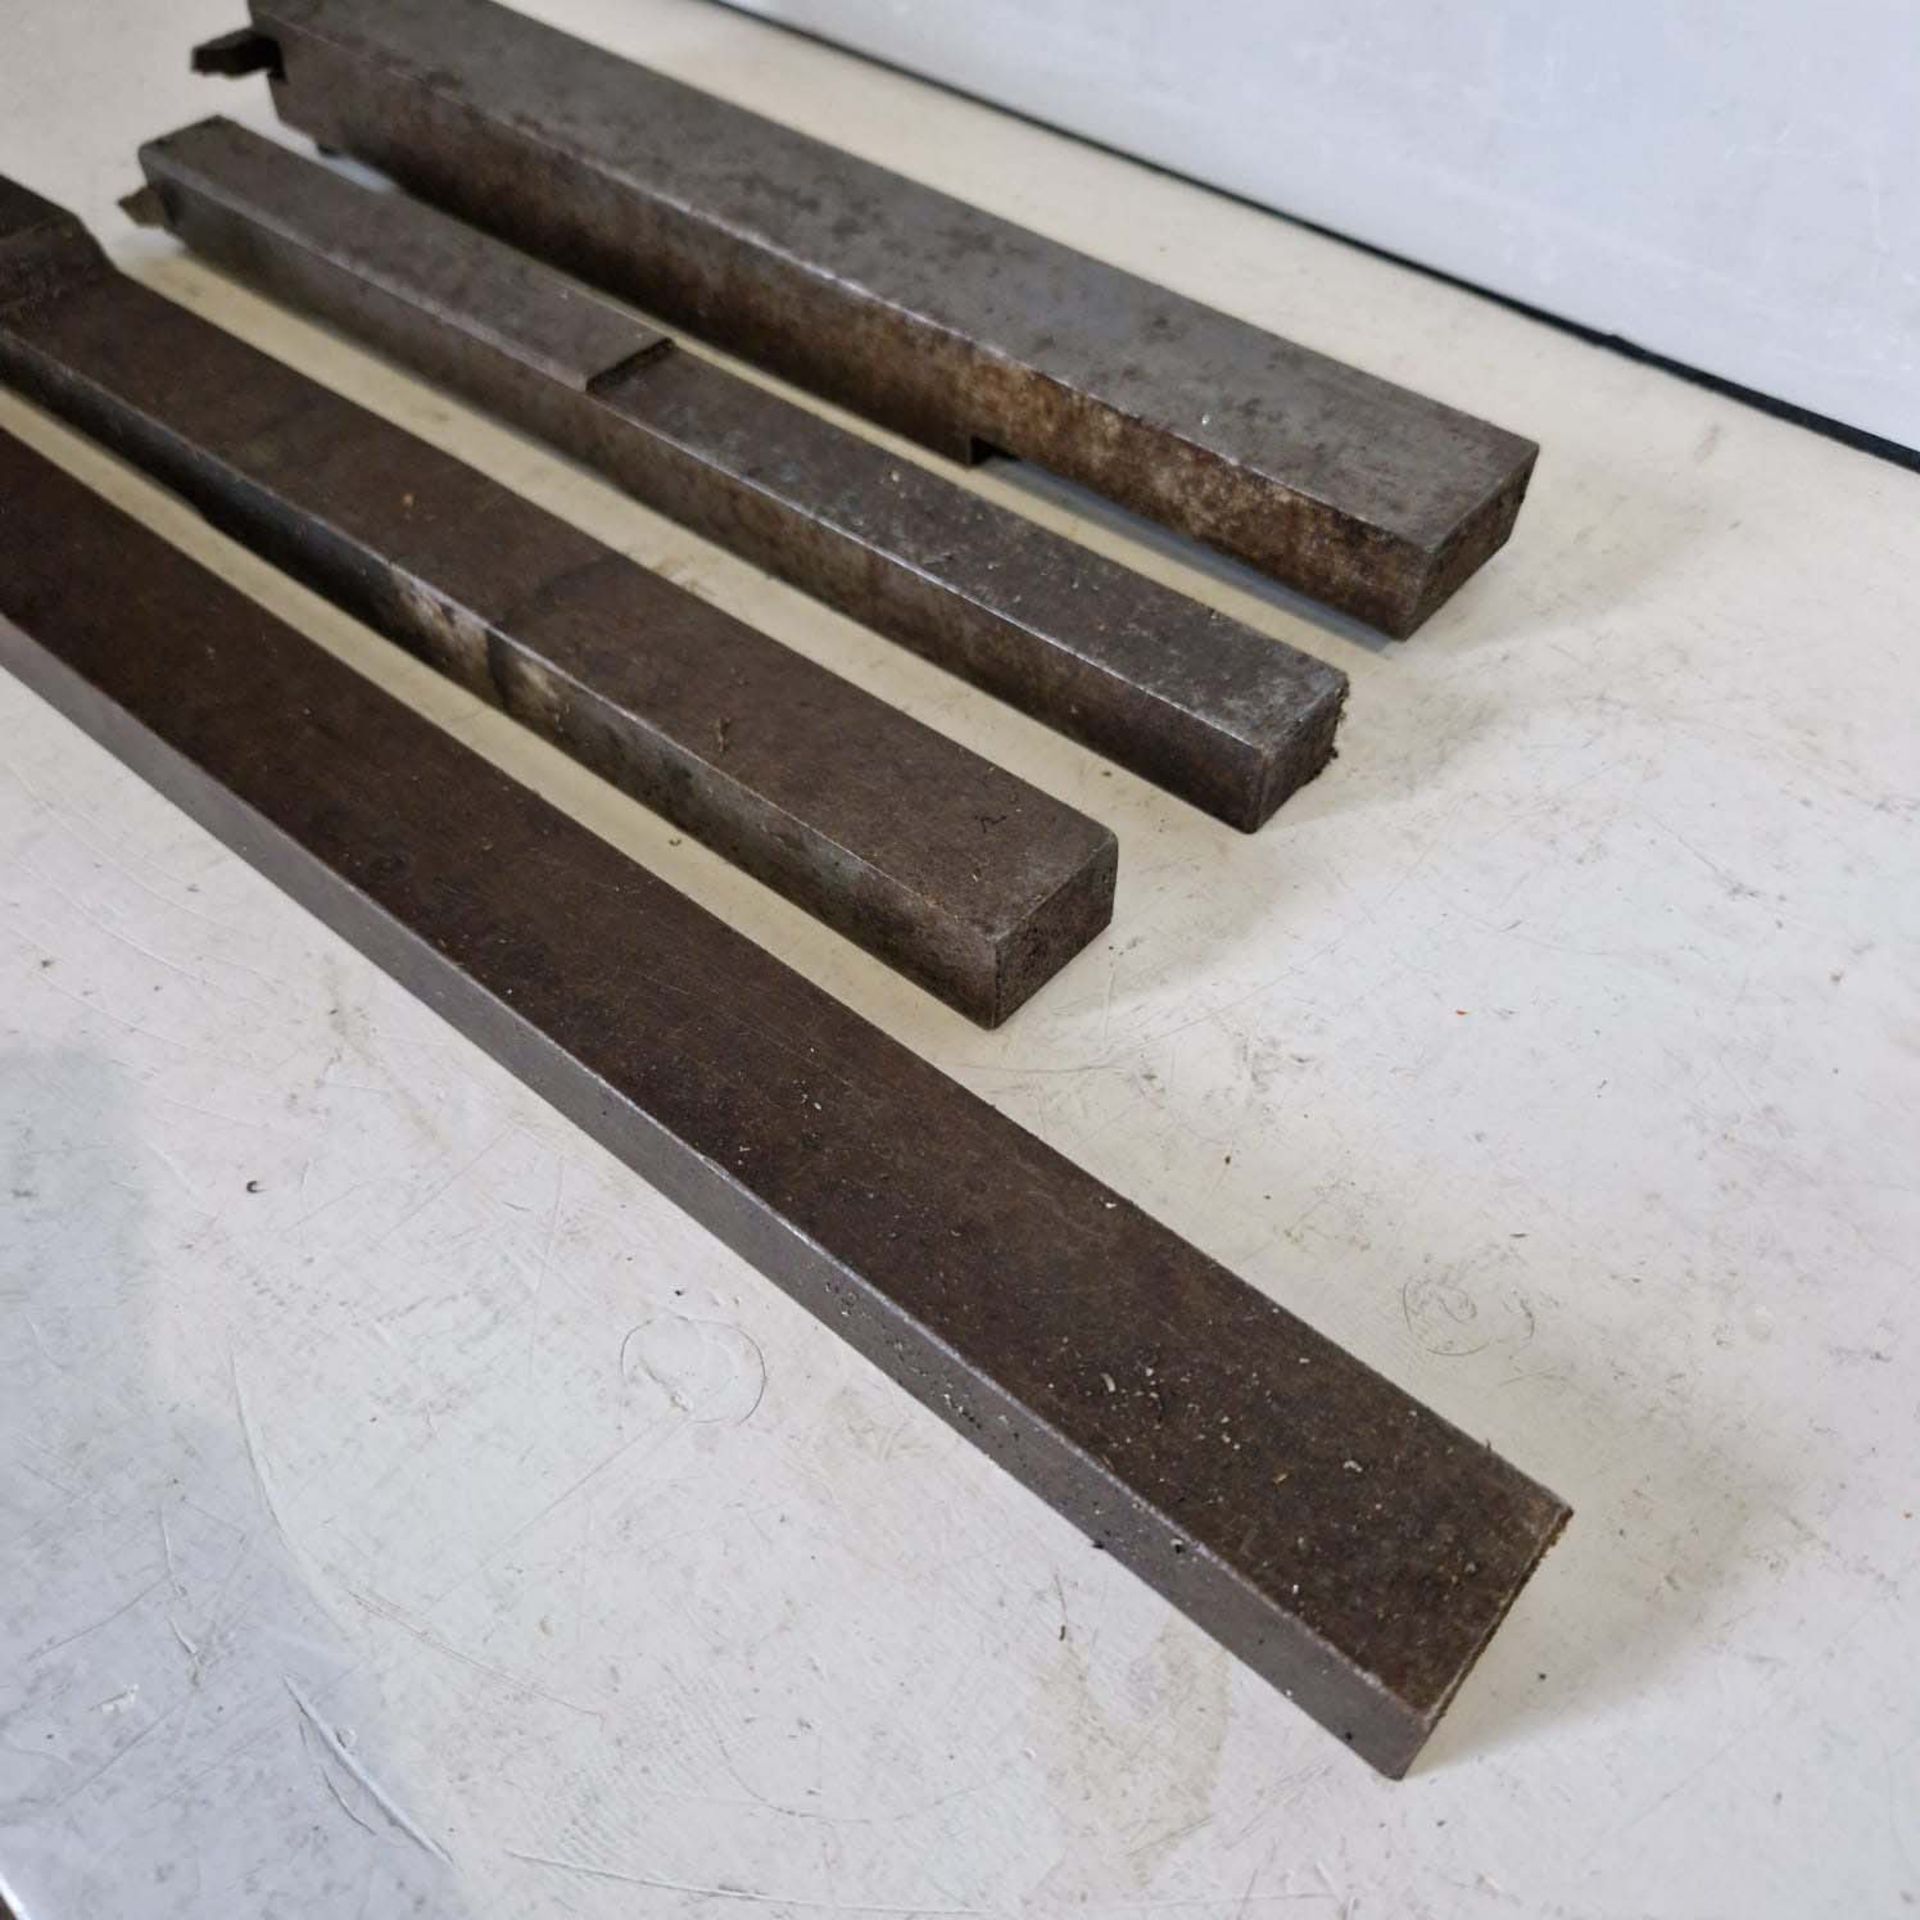 4 x Home Made Heavy Duty Lathe Boring Bars. Lengths from 400mm to 650mm. - Image 3 of 4